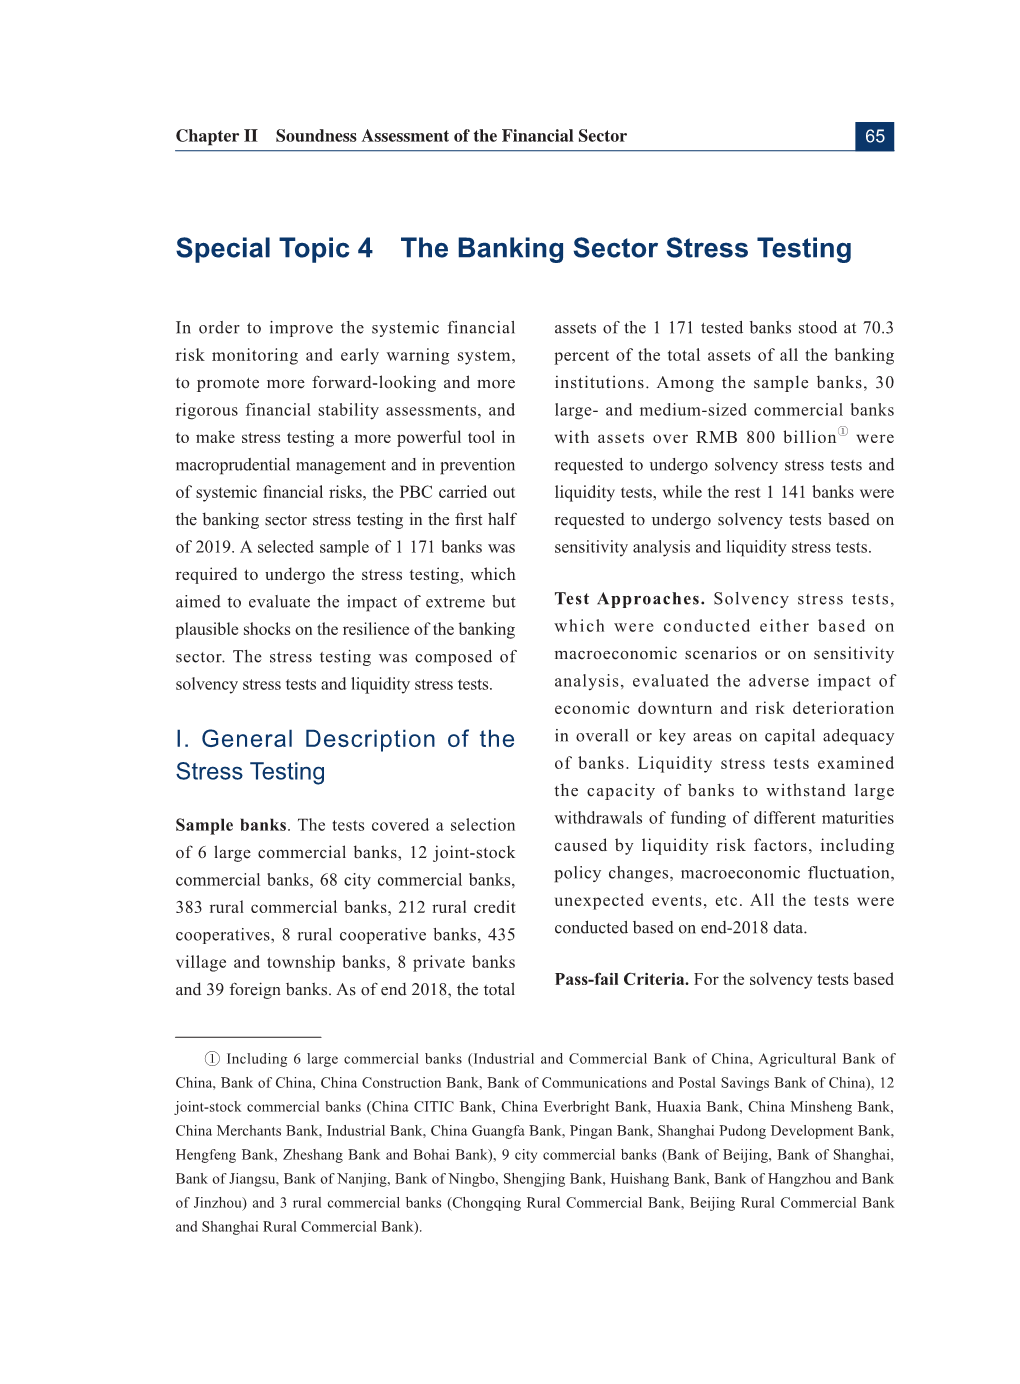 Special Topic 4 the Banking Sector Stress Testing